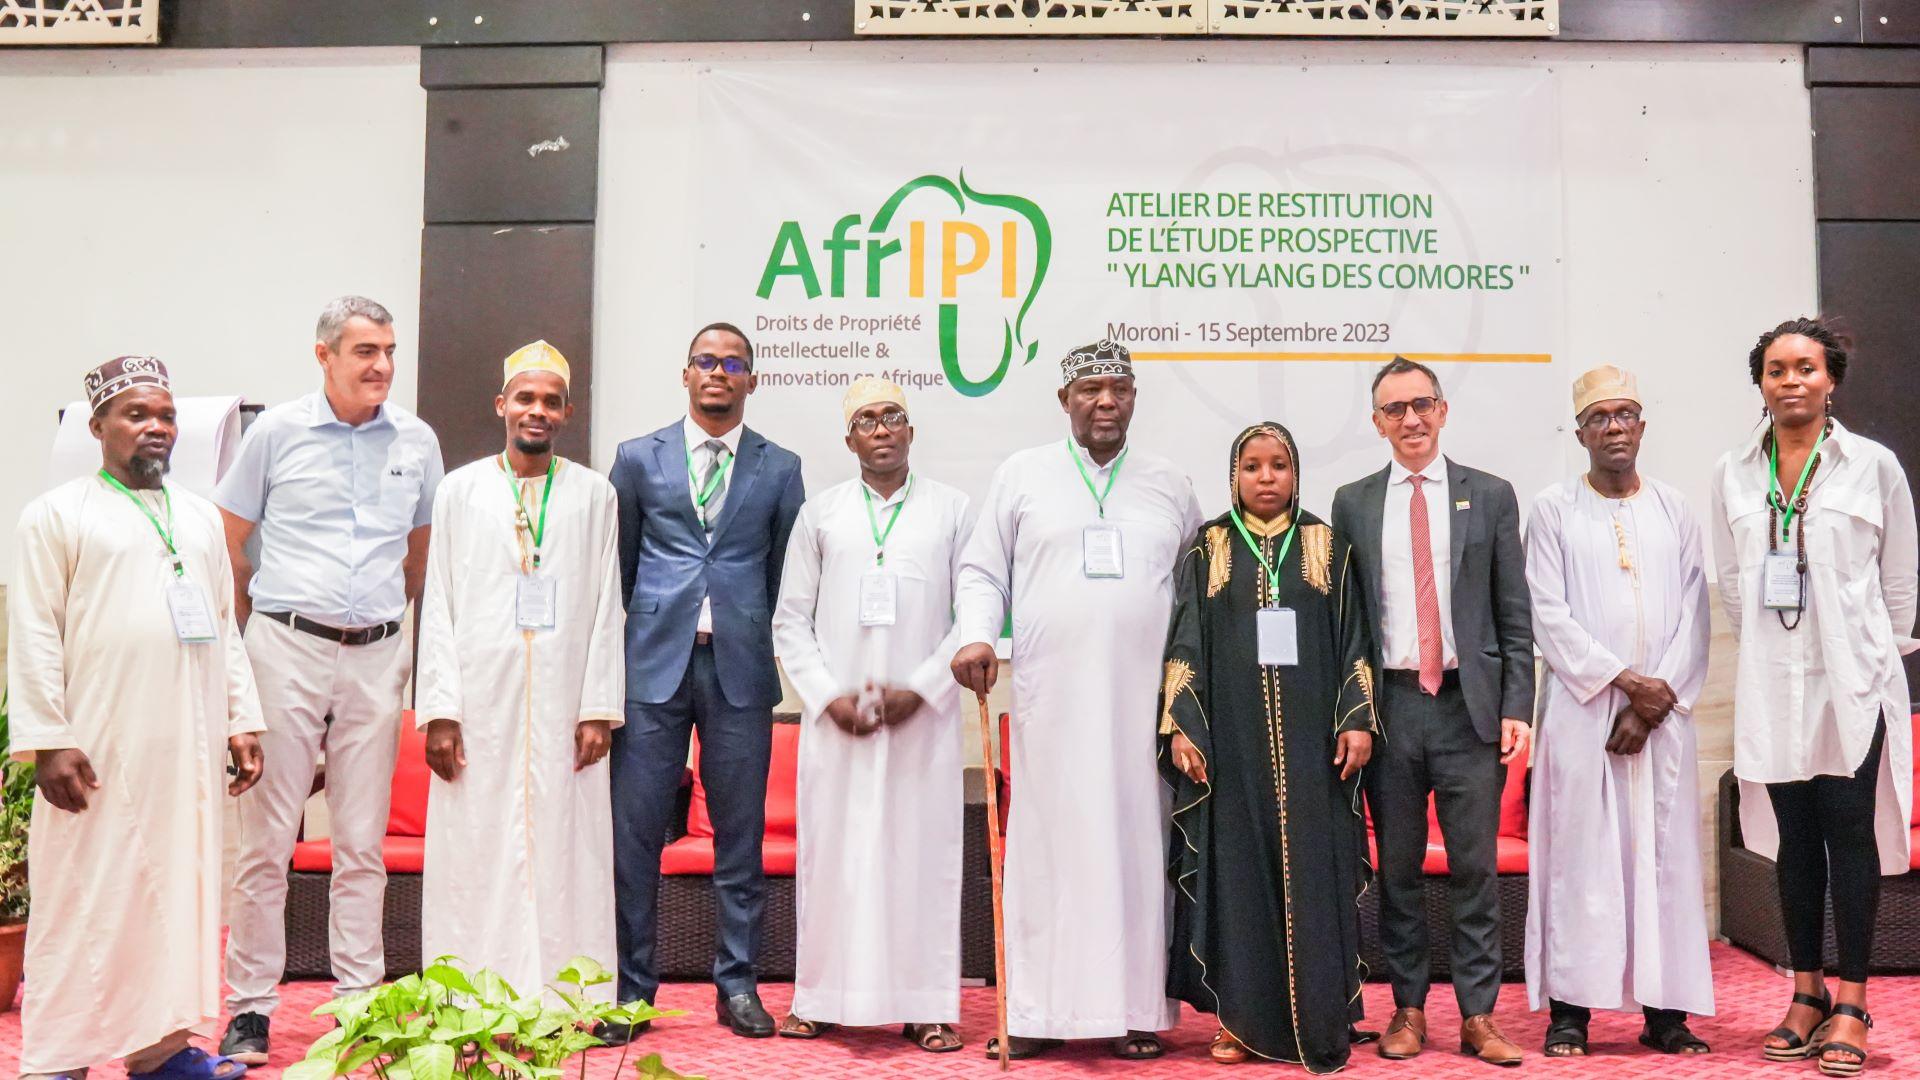 AfrIPI supports the registration of Geographical Indications in the African intellectual property organization